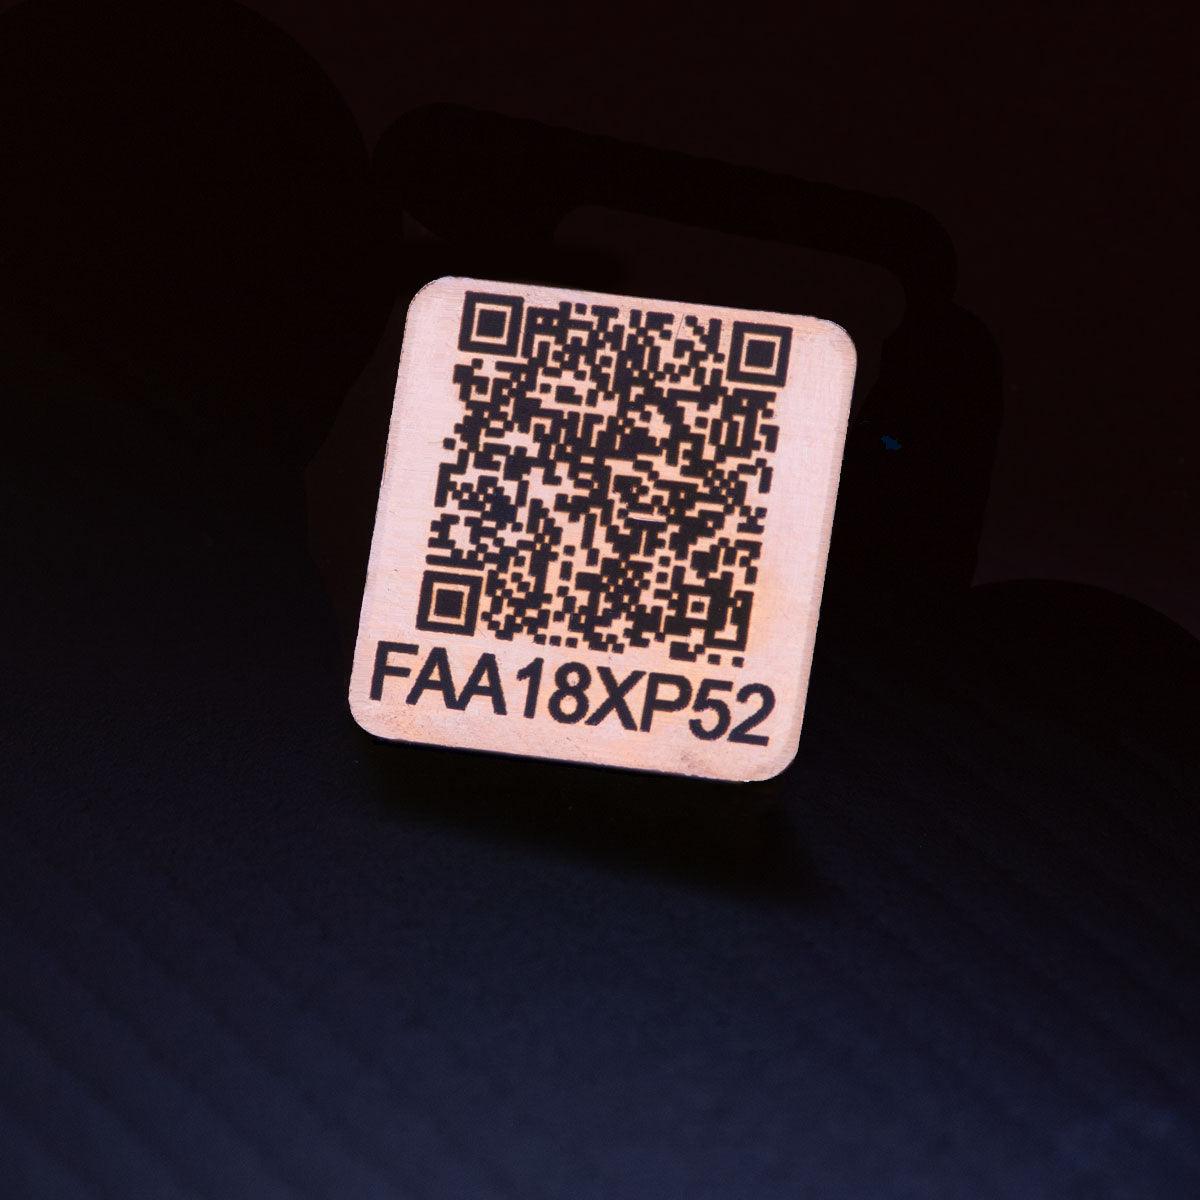 Drone tag made from copper and laser engraved with FAA registration number.